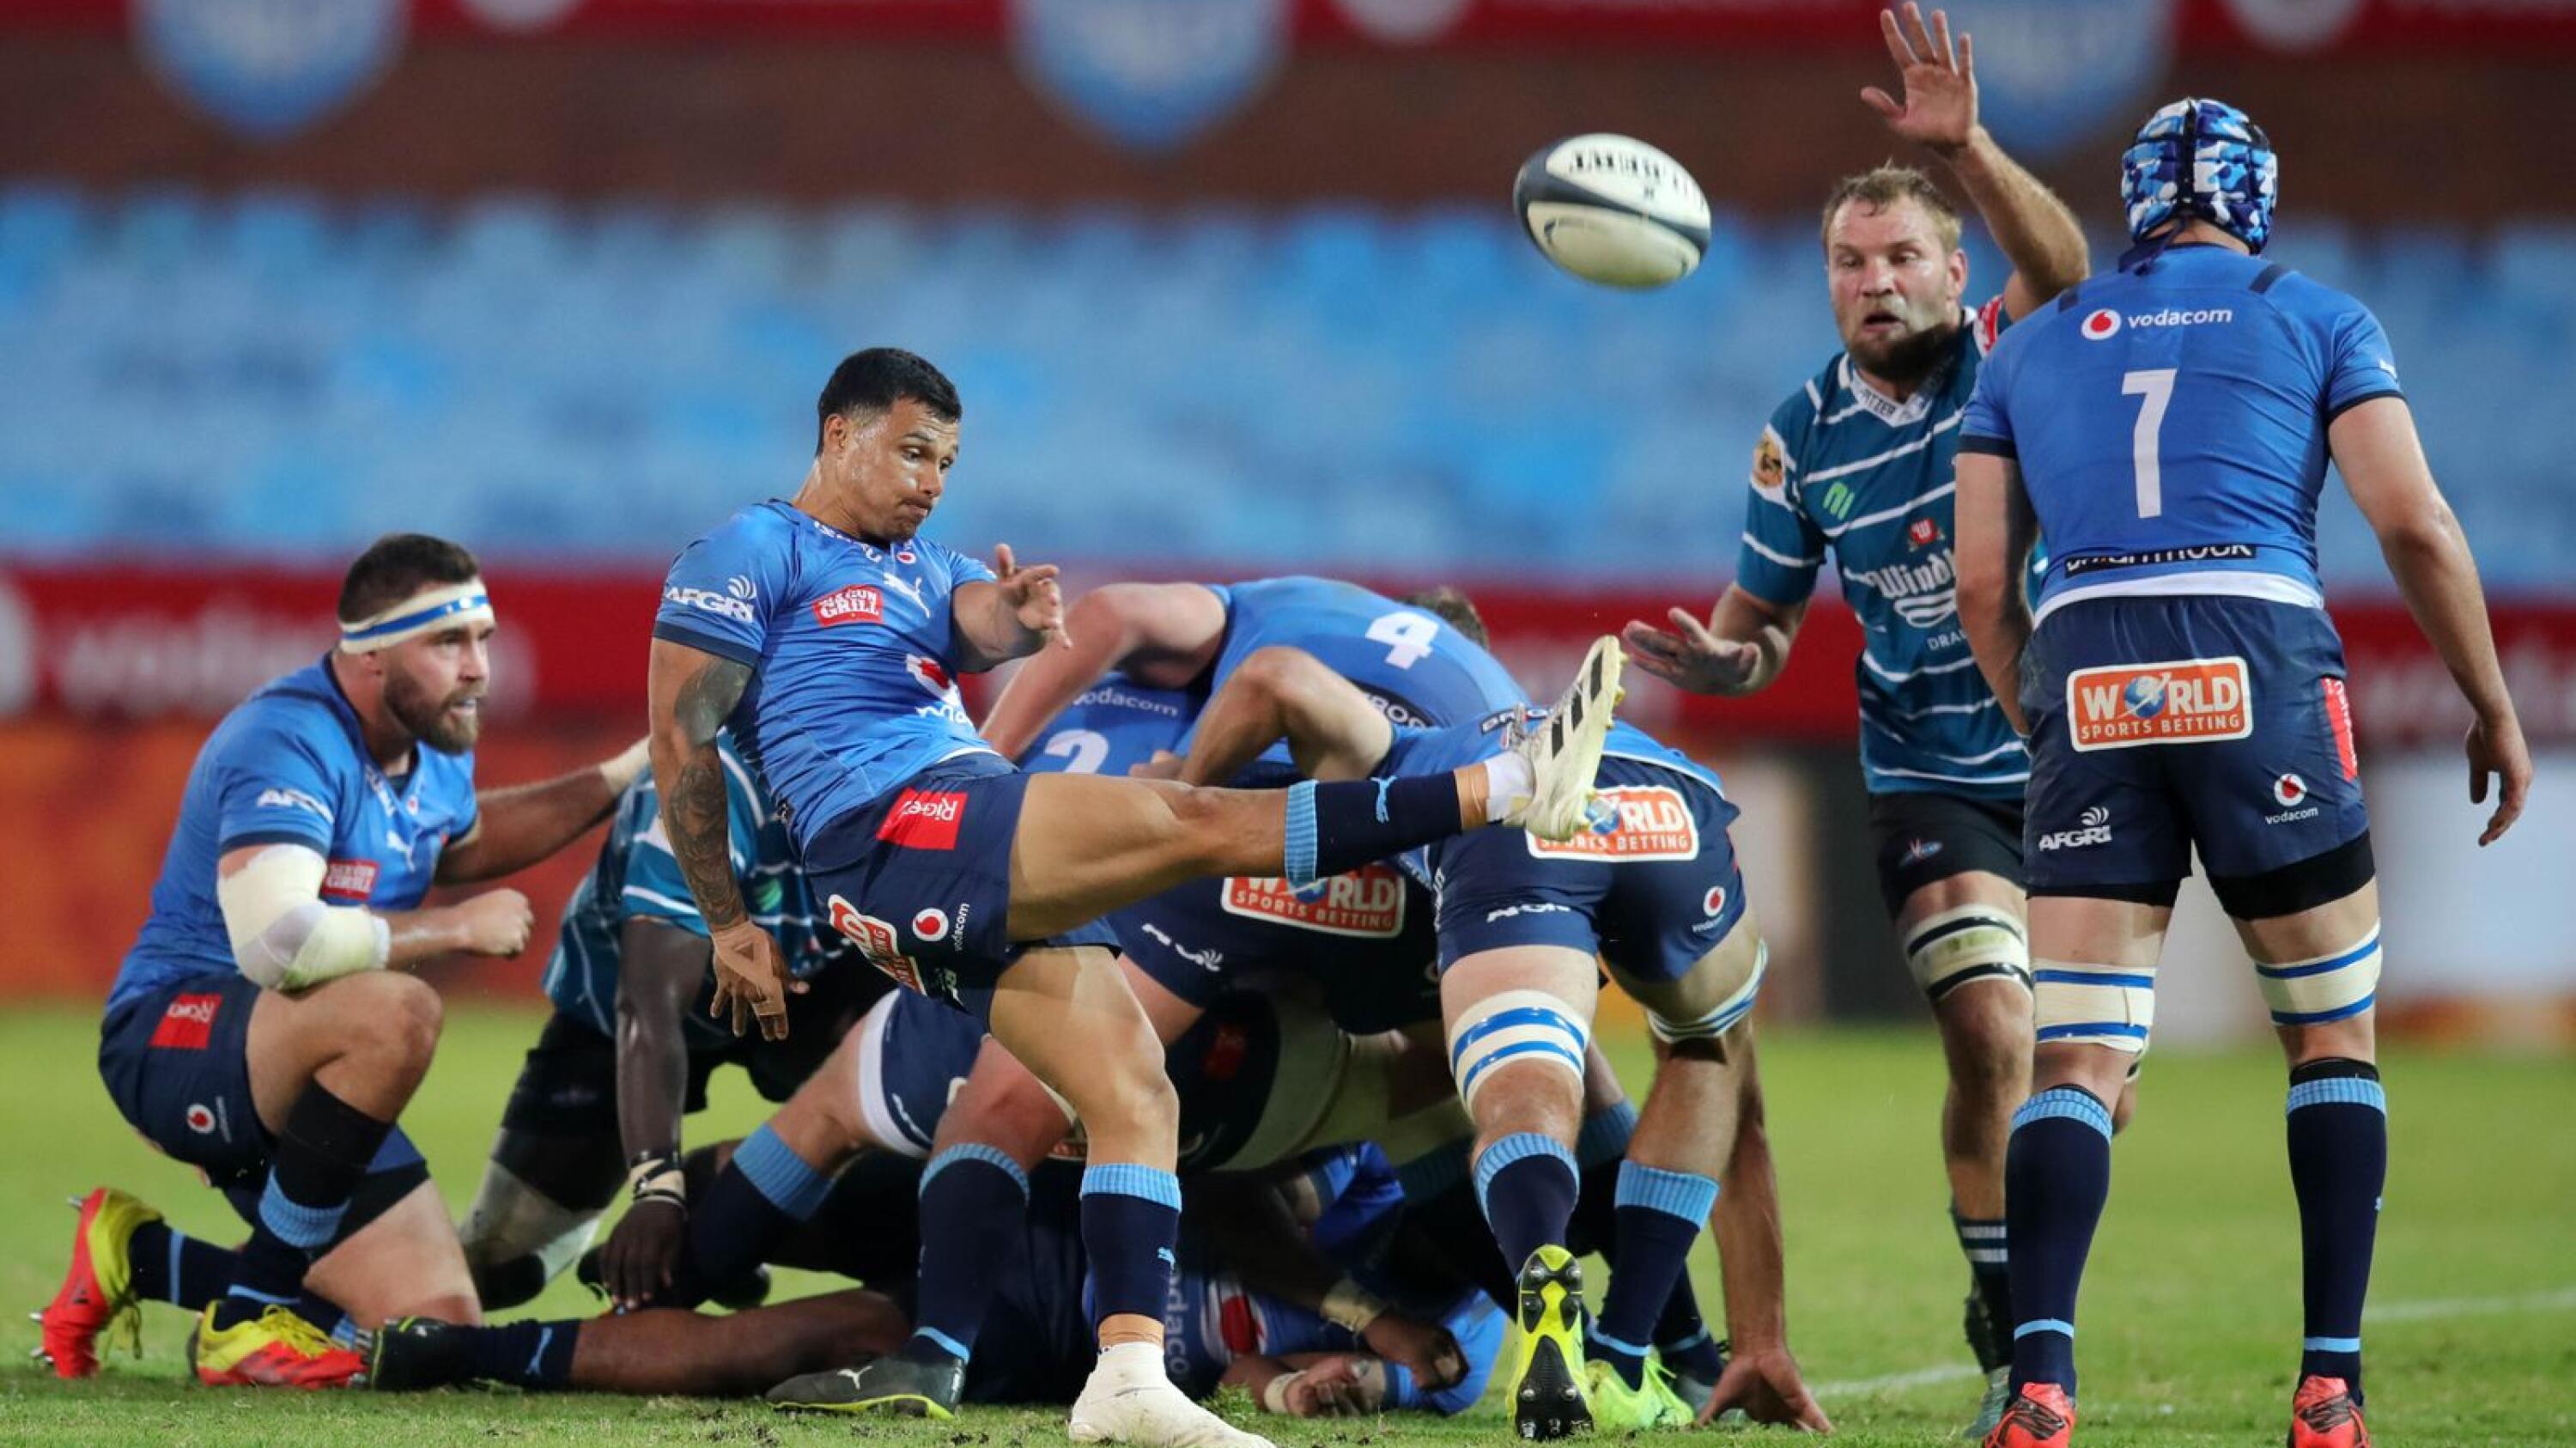 Embrose Papier of the Bulls kicks the ball during their Carling Currie Cup match against Griquas at Loftus Versfeld Stadium in Tshwane on Saturday. Photo: Samuel Shivambu/BackpagePi